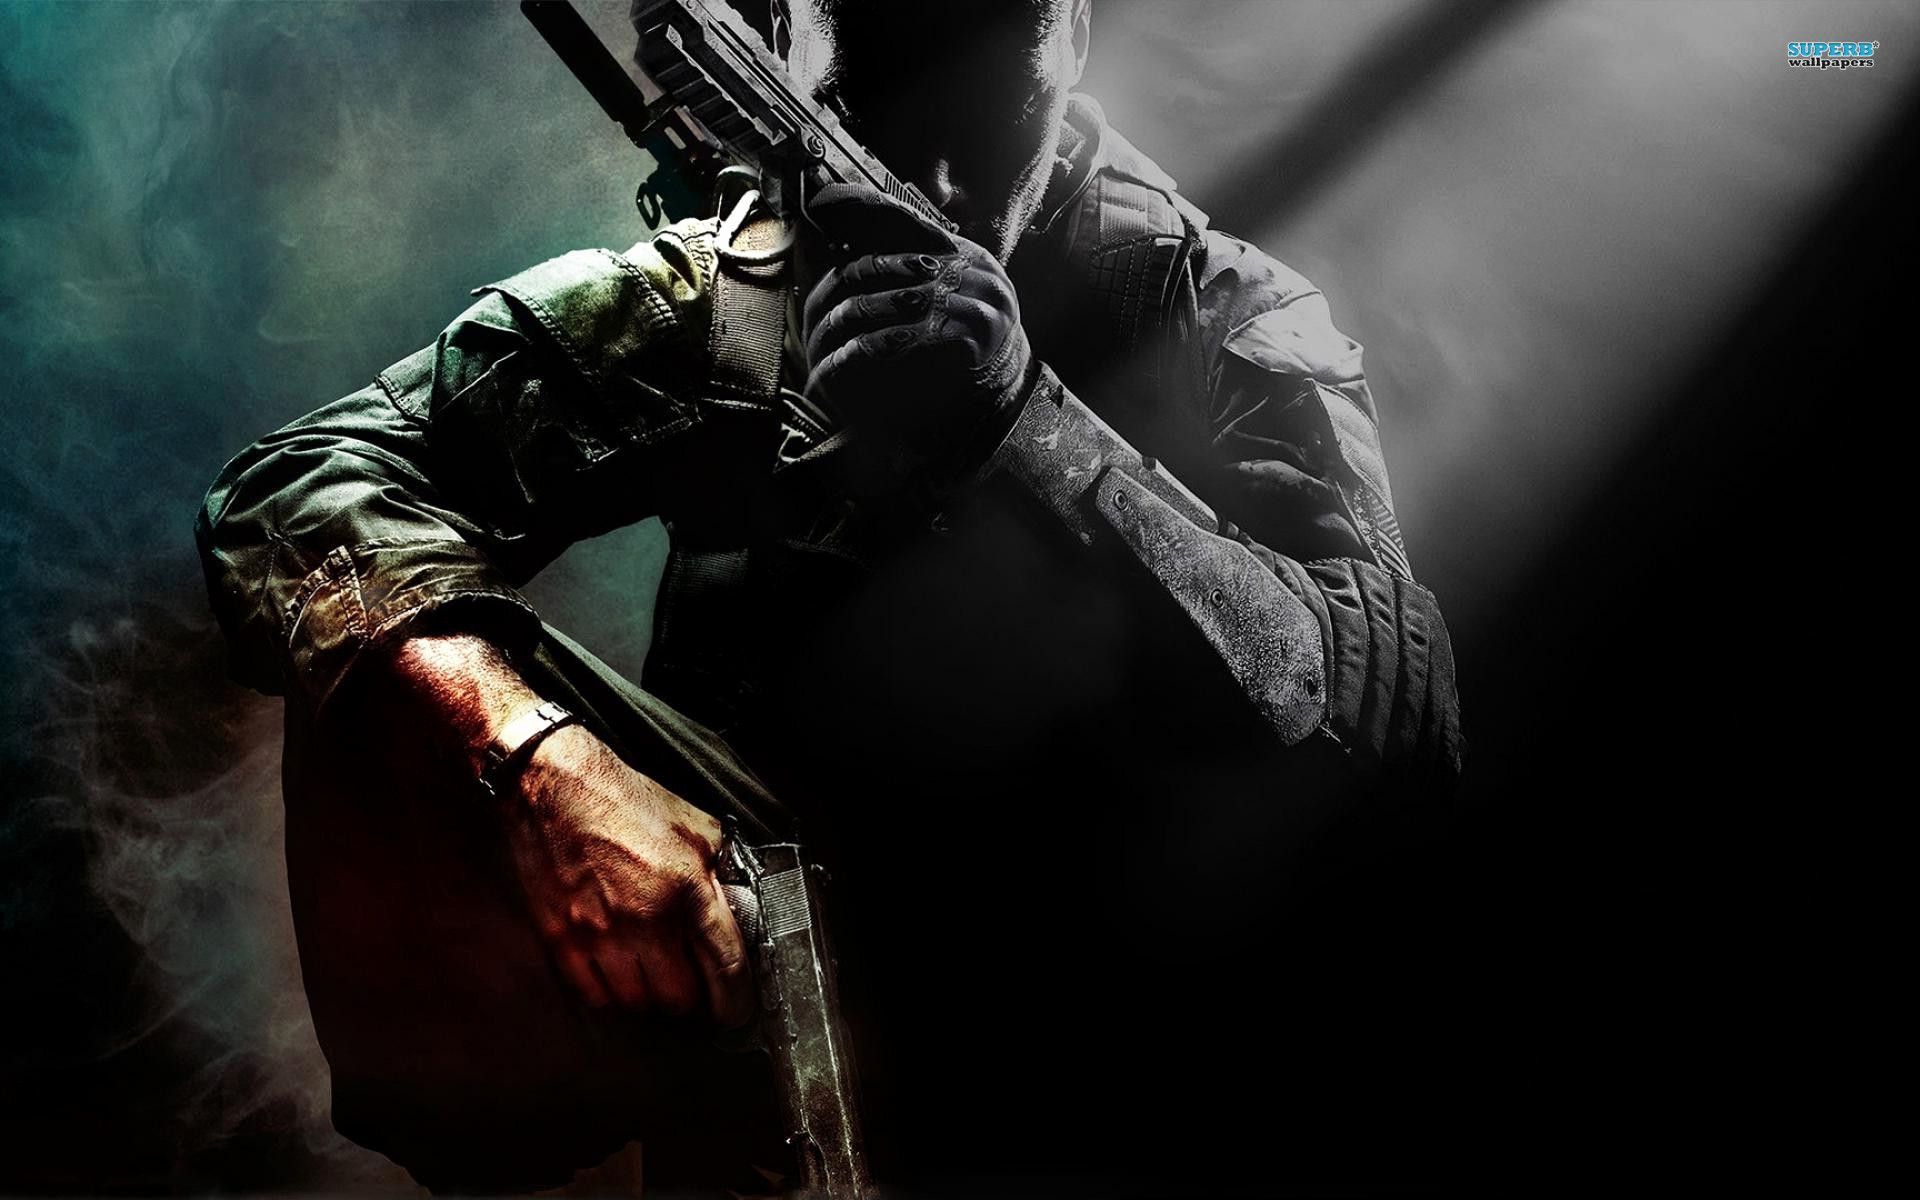 Black Ops 2 Wallpaper background picture